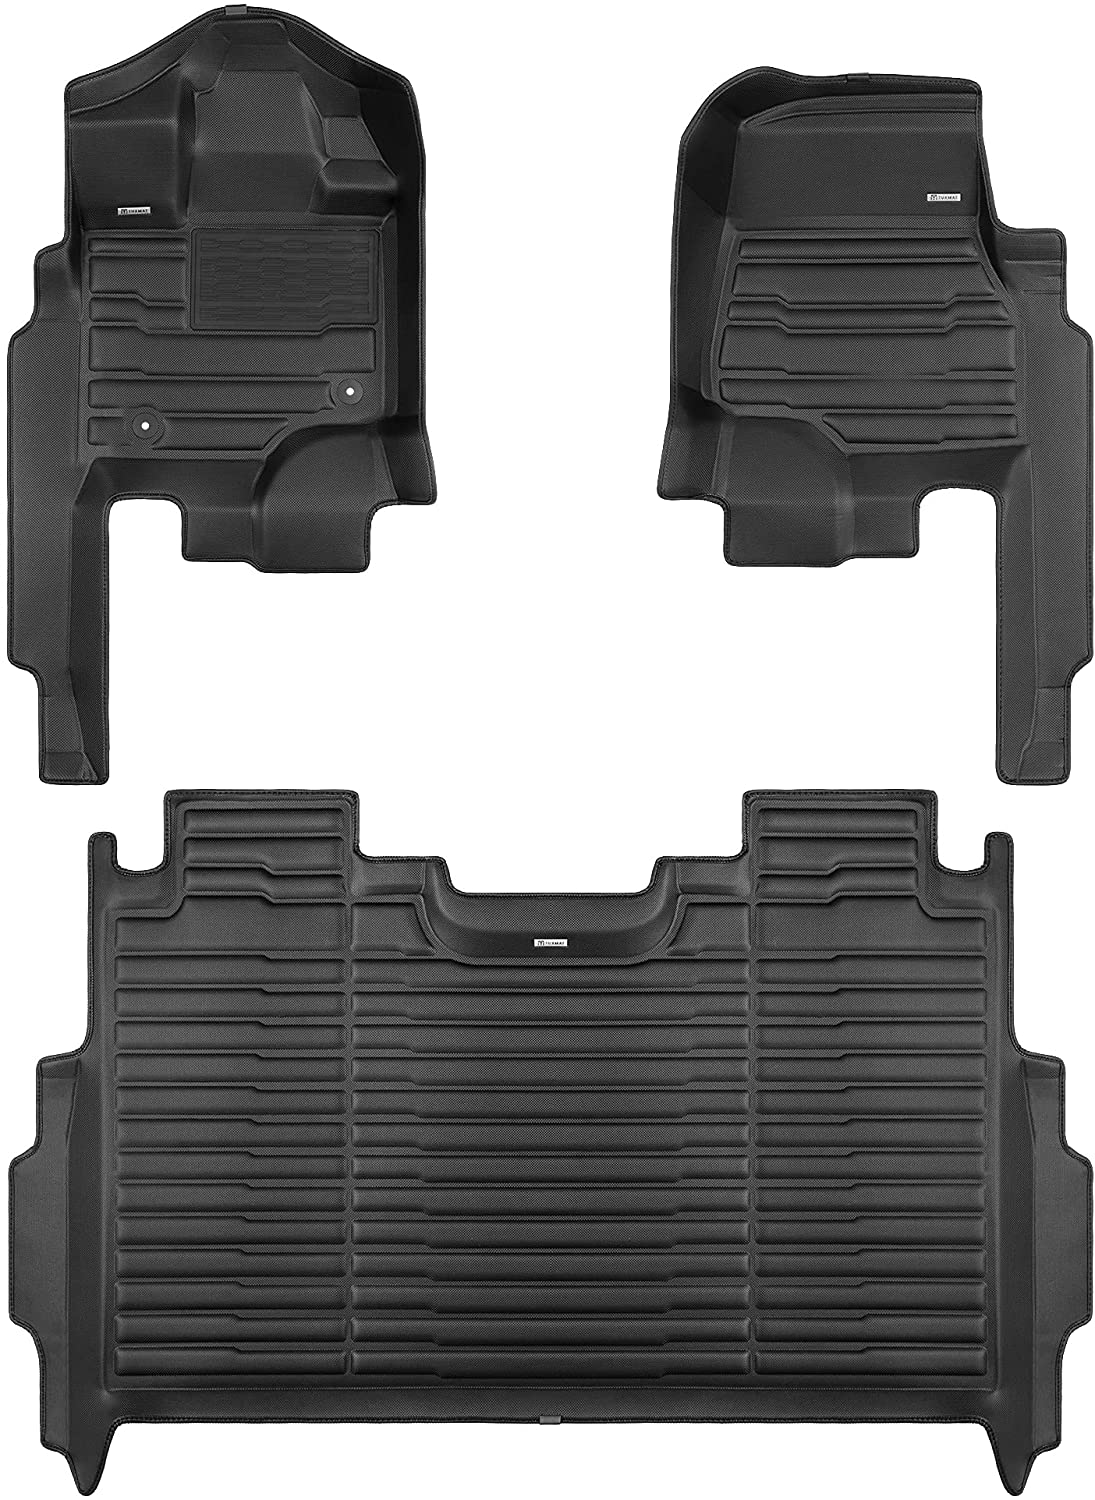 TuxMat 8601 - for Ford F150 SuperCrew Without Rear Seat Storage 2021-2024 Models - Custom Car Mats - Maximum Coverage, All Weather, Laser Measured - This Full Set Includes 1st and 2nd Rows